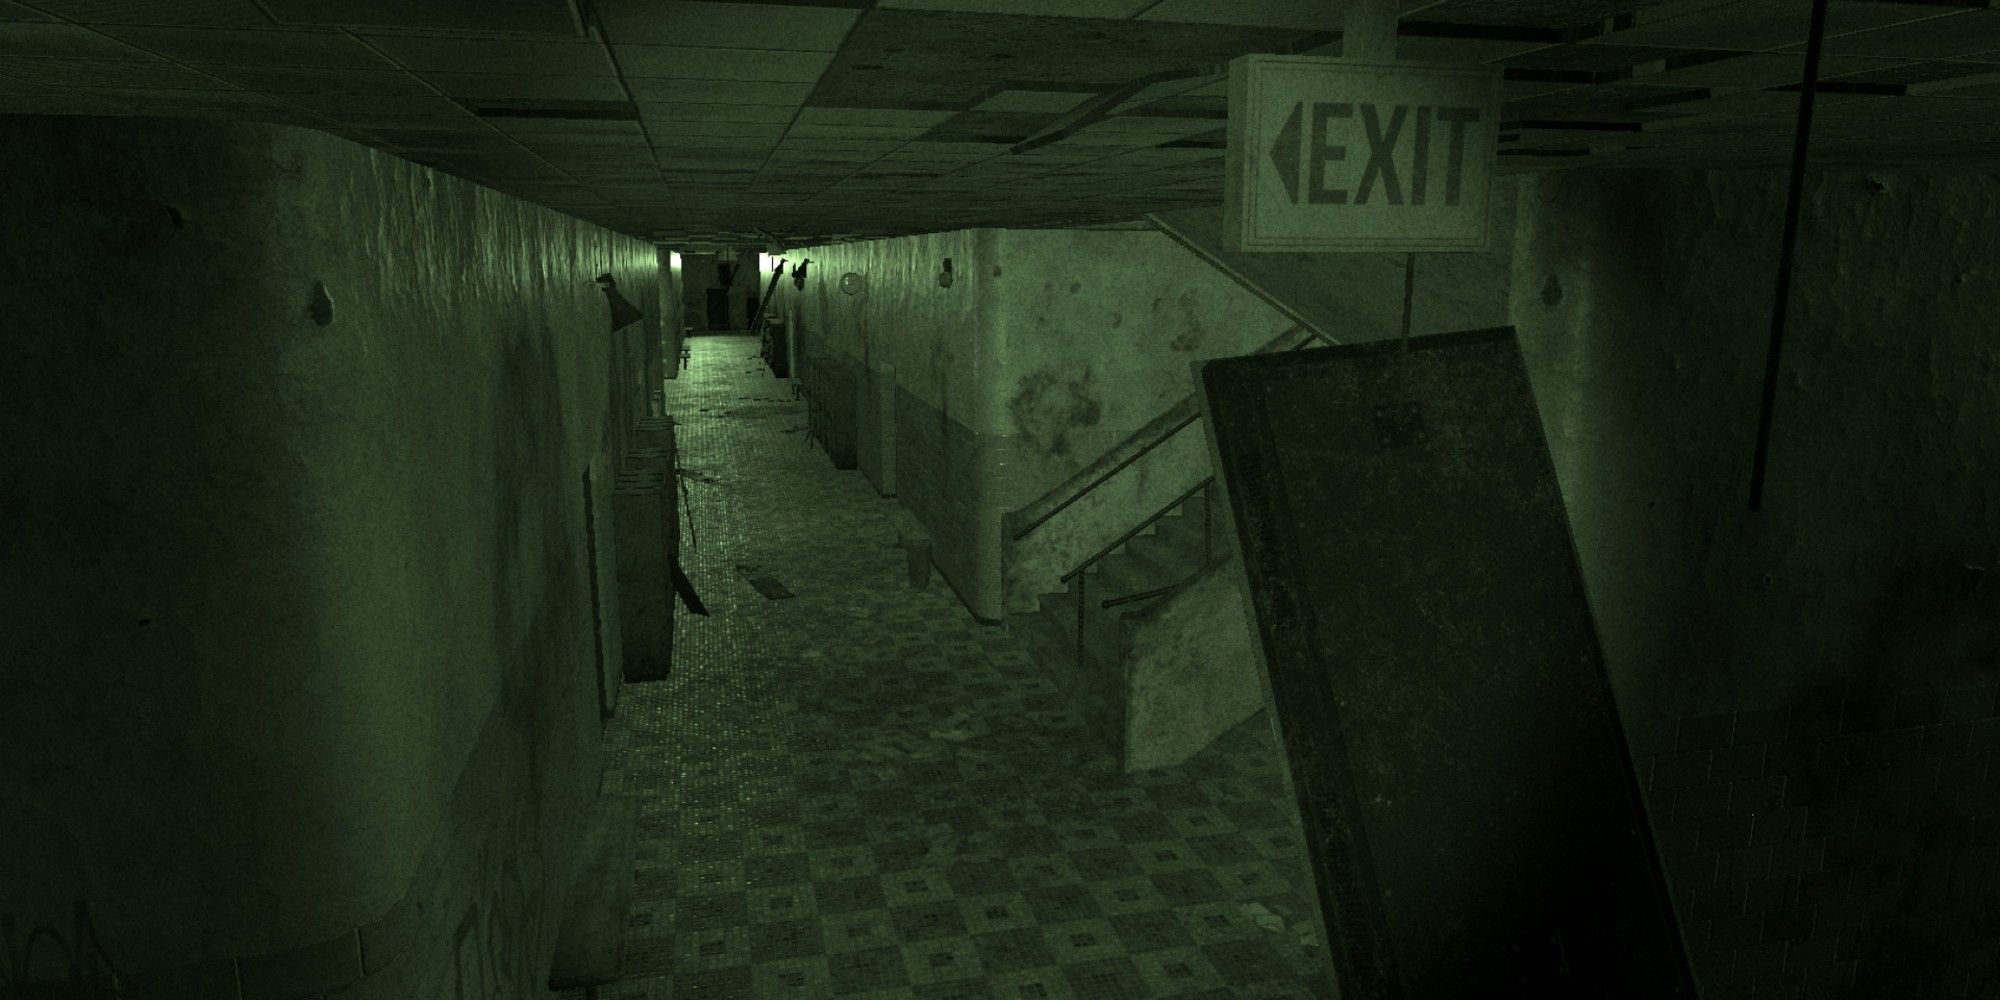 A player explores using Night Vision in Phasmophobia